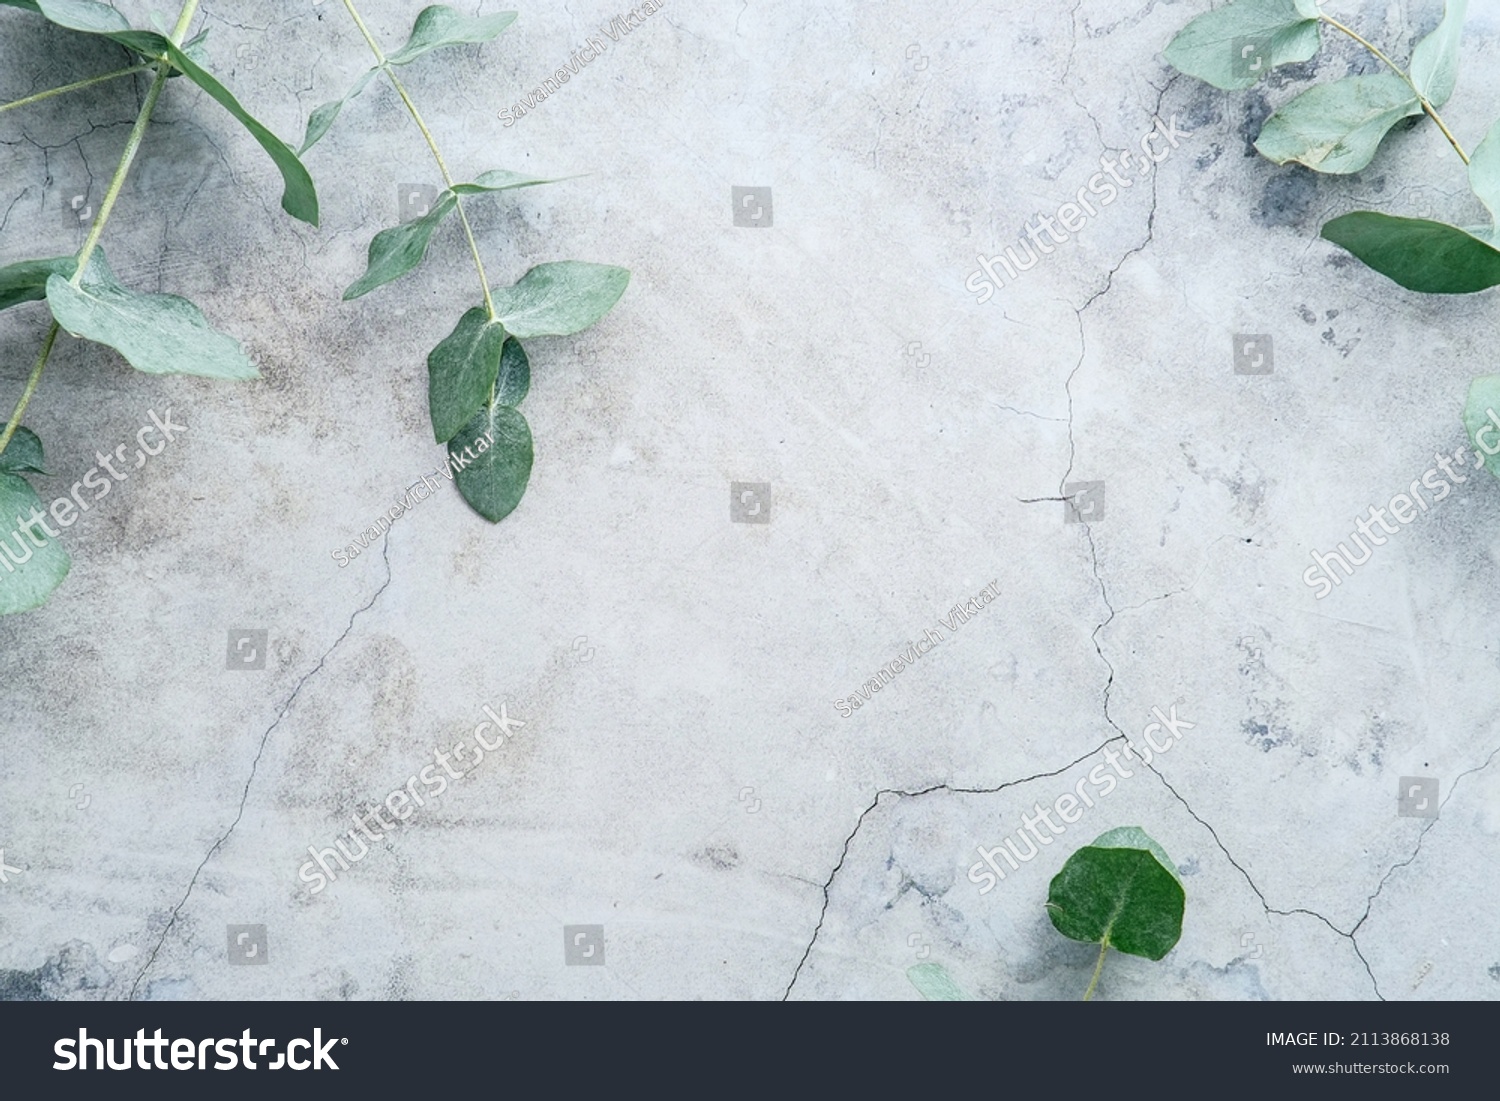 Eucalyptus branches on stone surface. Flat lay, top view, overhead. #2113868138